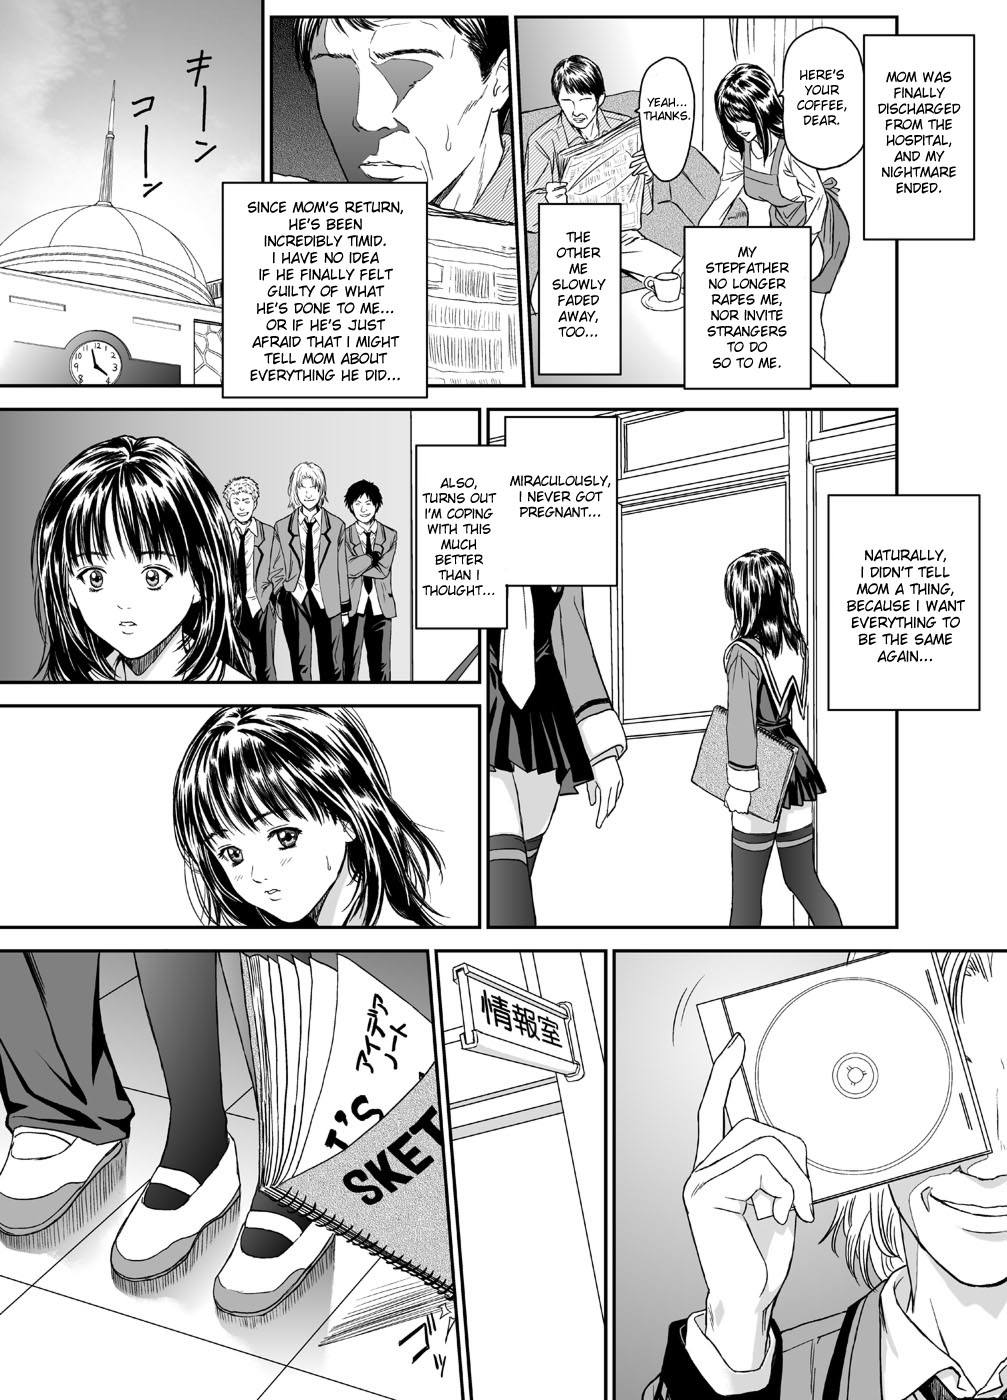 [Redlight] Iori - The Dark Side Of That Girl (Is) [English] page 25 full